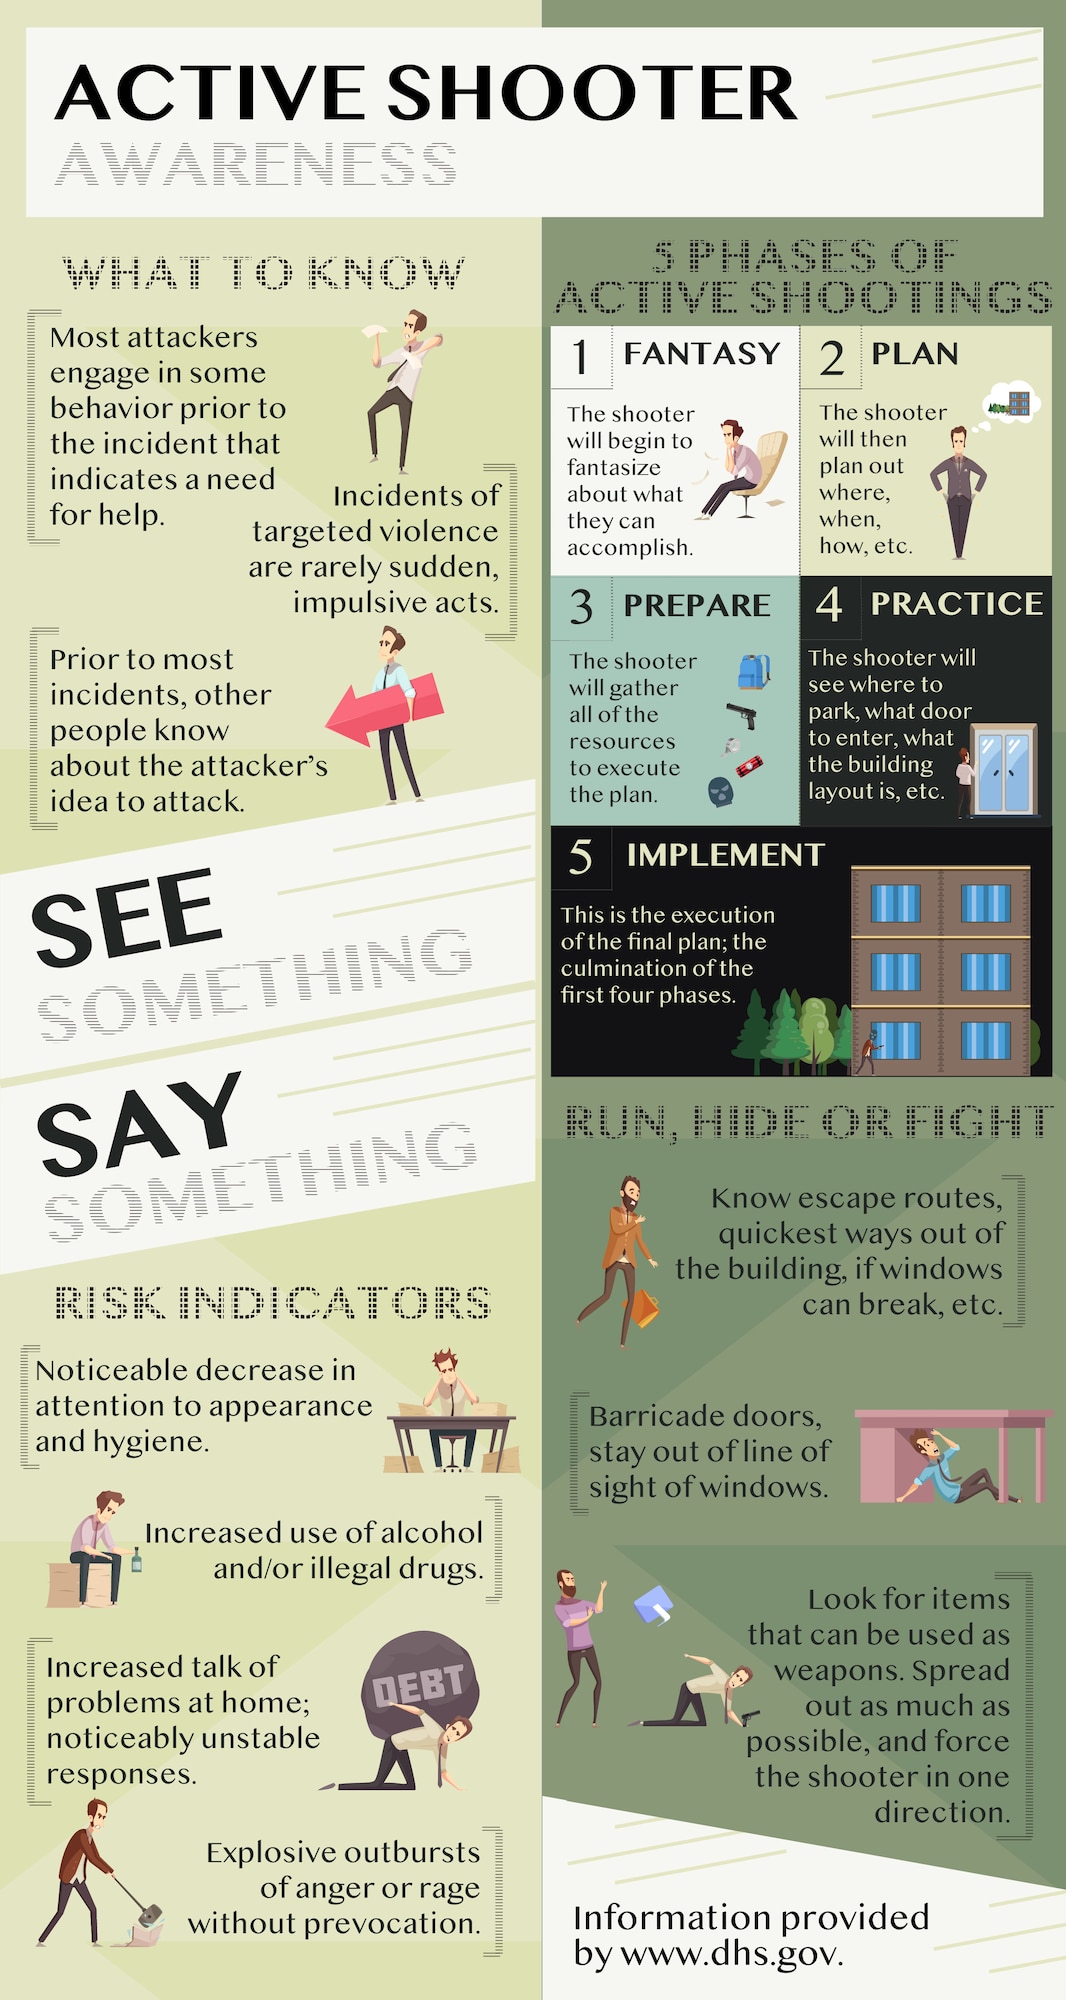 Incidents of targeted violence are rarely sudden impulsive acts. Most attackers engage in some behavior to the incident that cause others concern or indicate a need for help. Getting to know coworkers can help identify warning signs early on and may help prevent these acts. (U.S. Air Force graphic by Airman Amanda Lovelace)